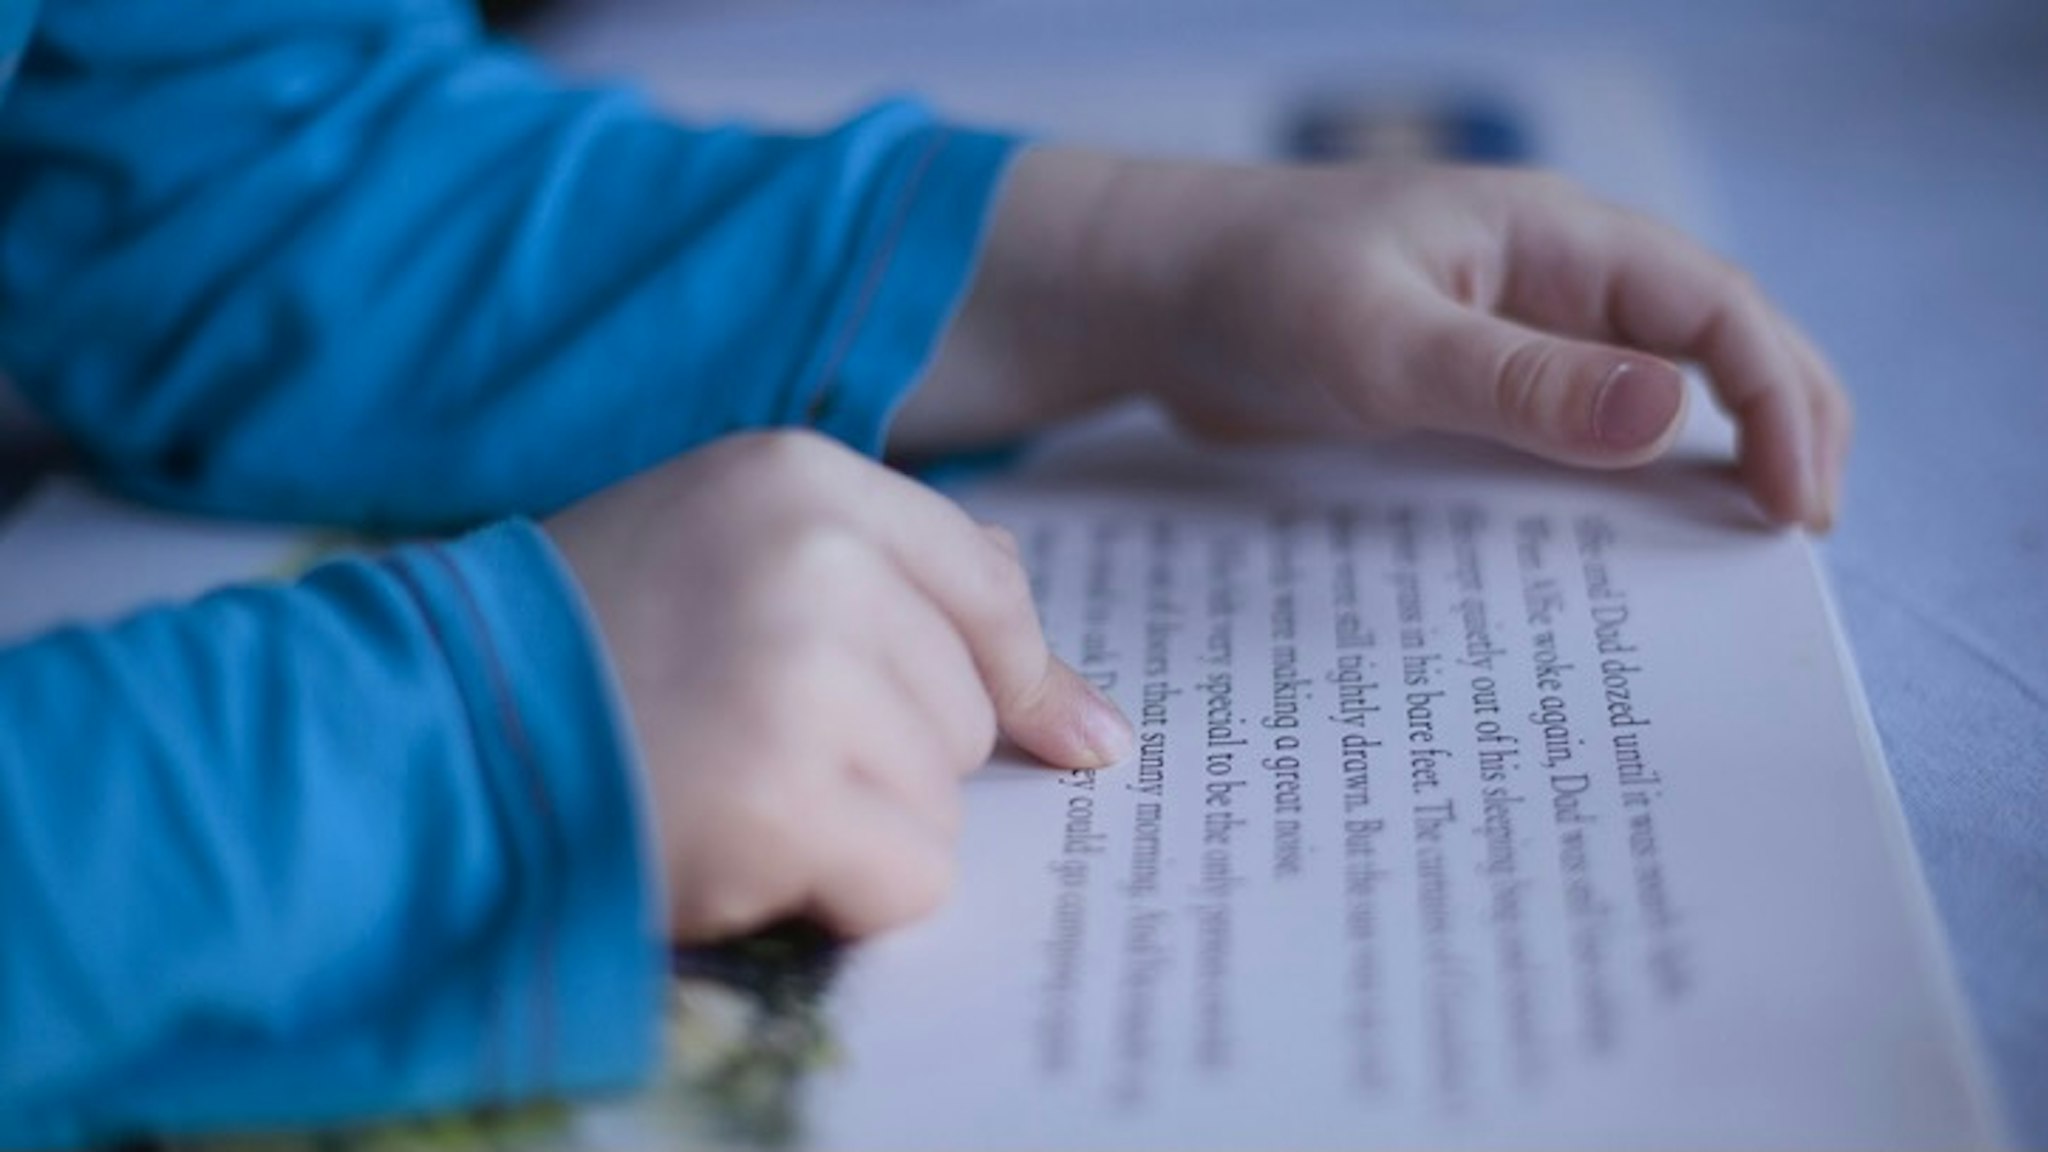 close up boys fingers pointing to words in book - stock photo Gary John Norman via Getty Images